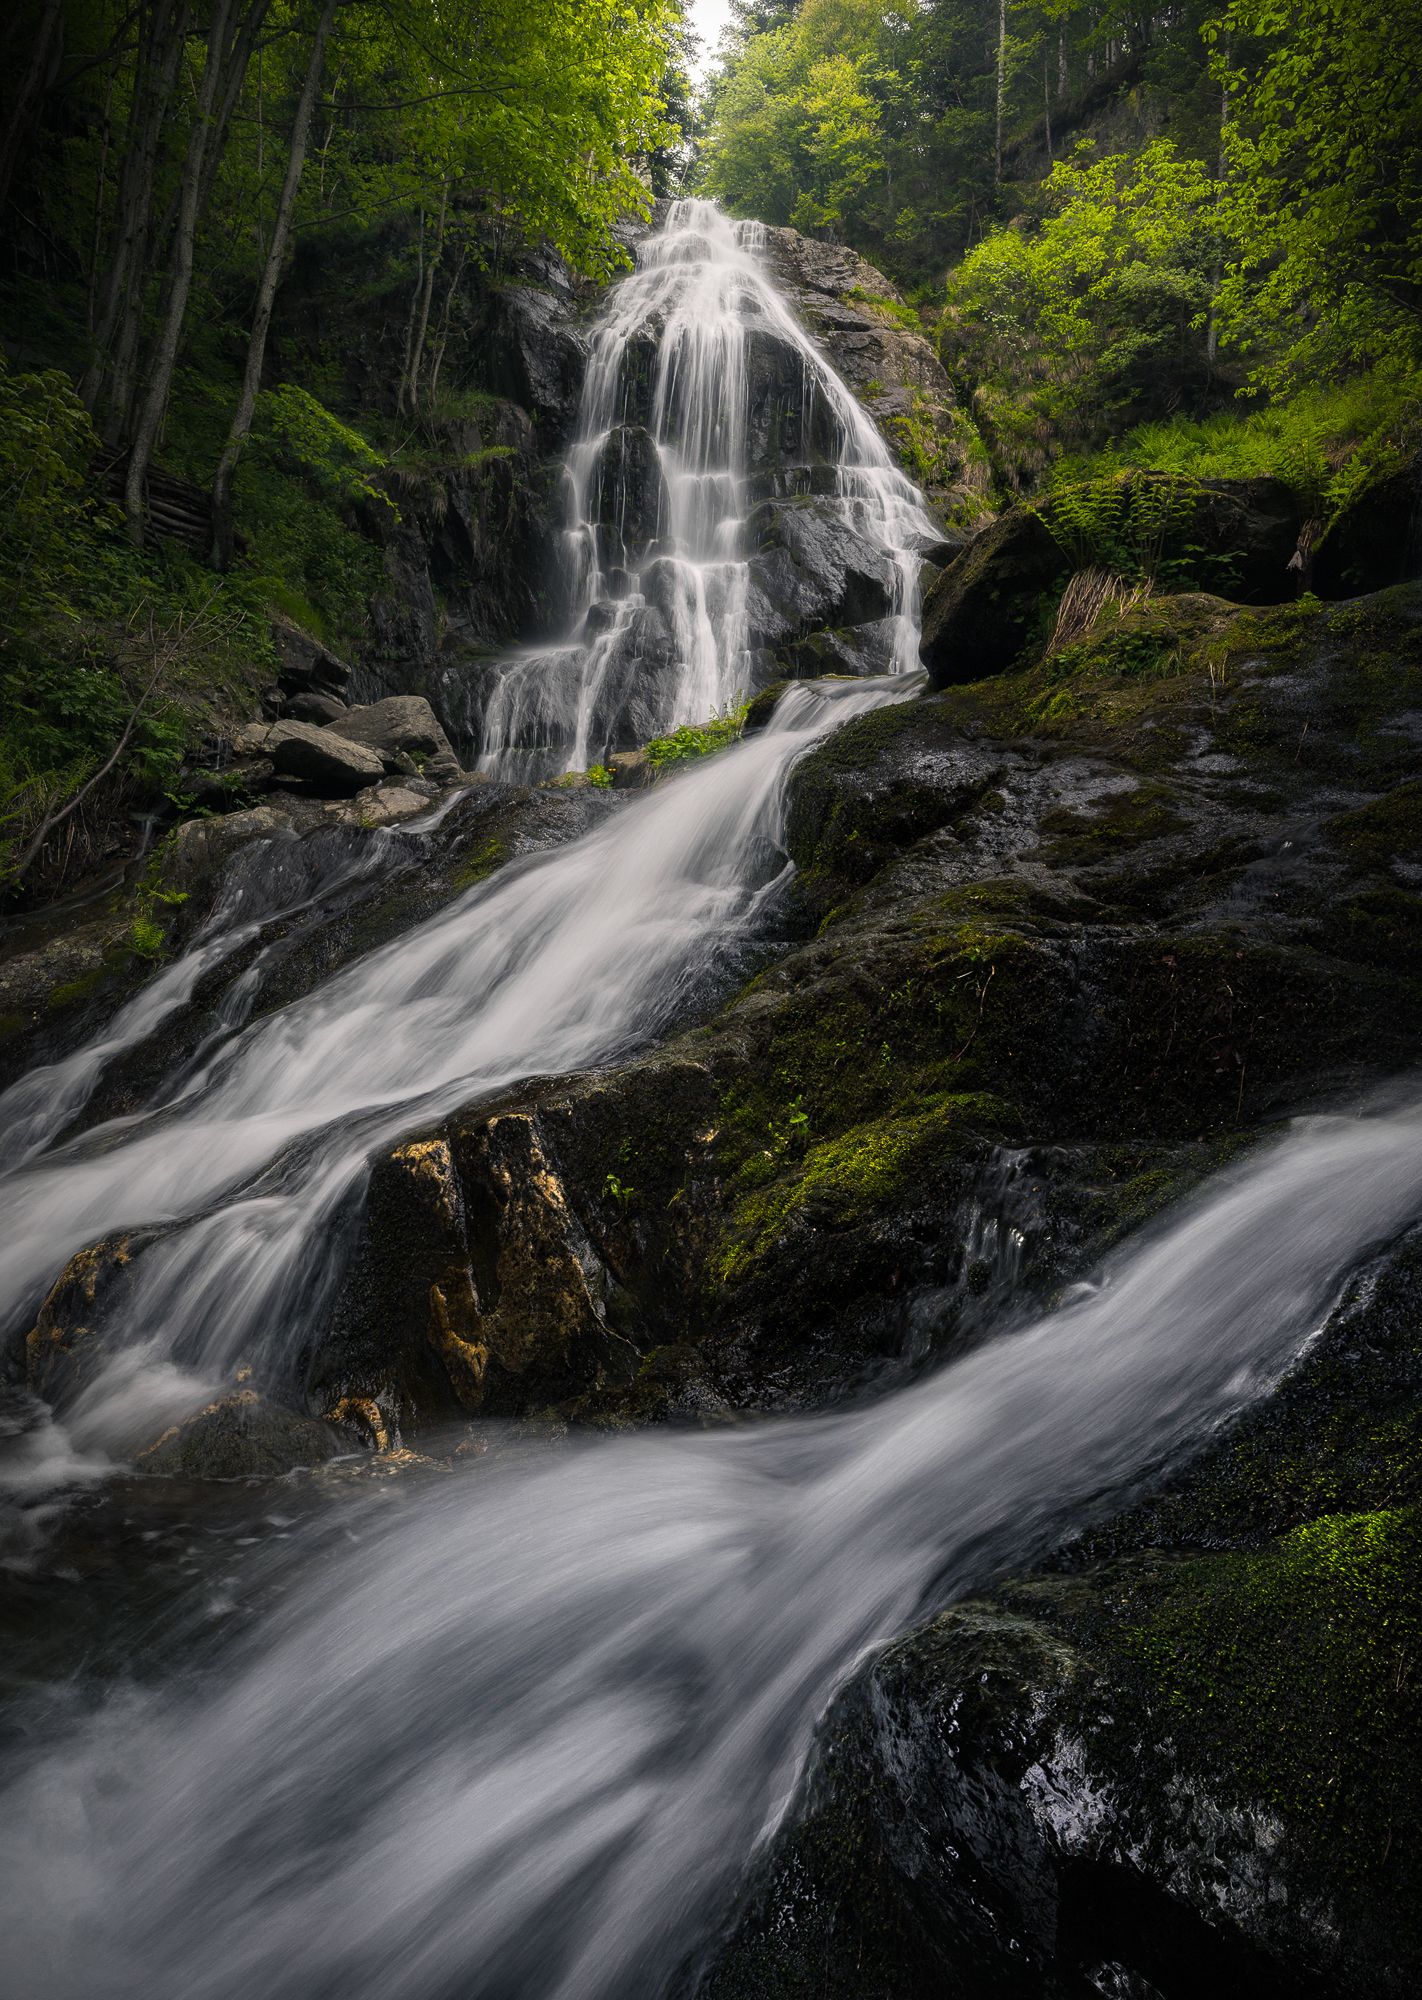 Landscape waterfall spring forest Alps mood italy, Stefano Balma